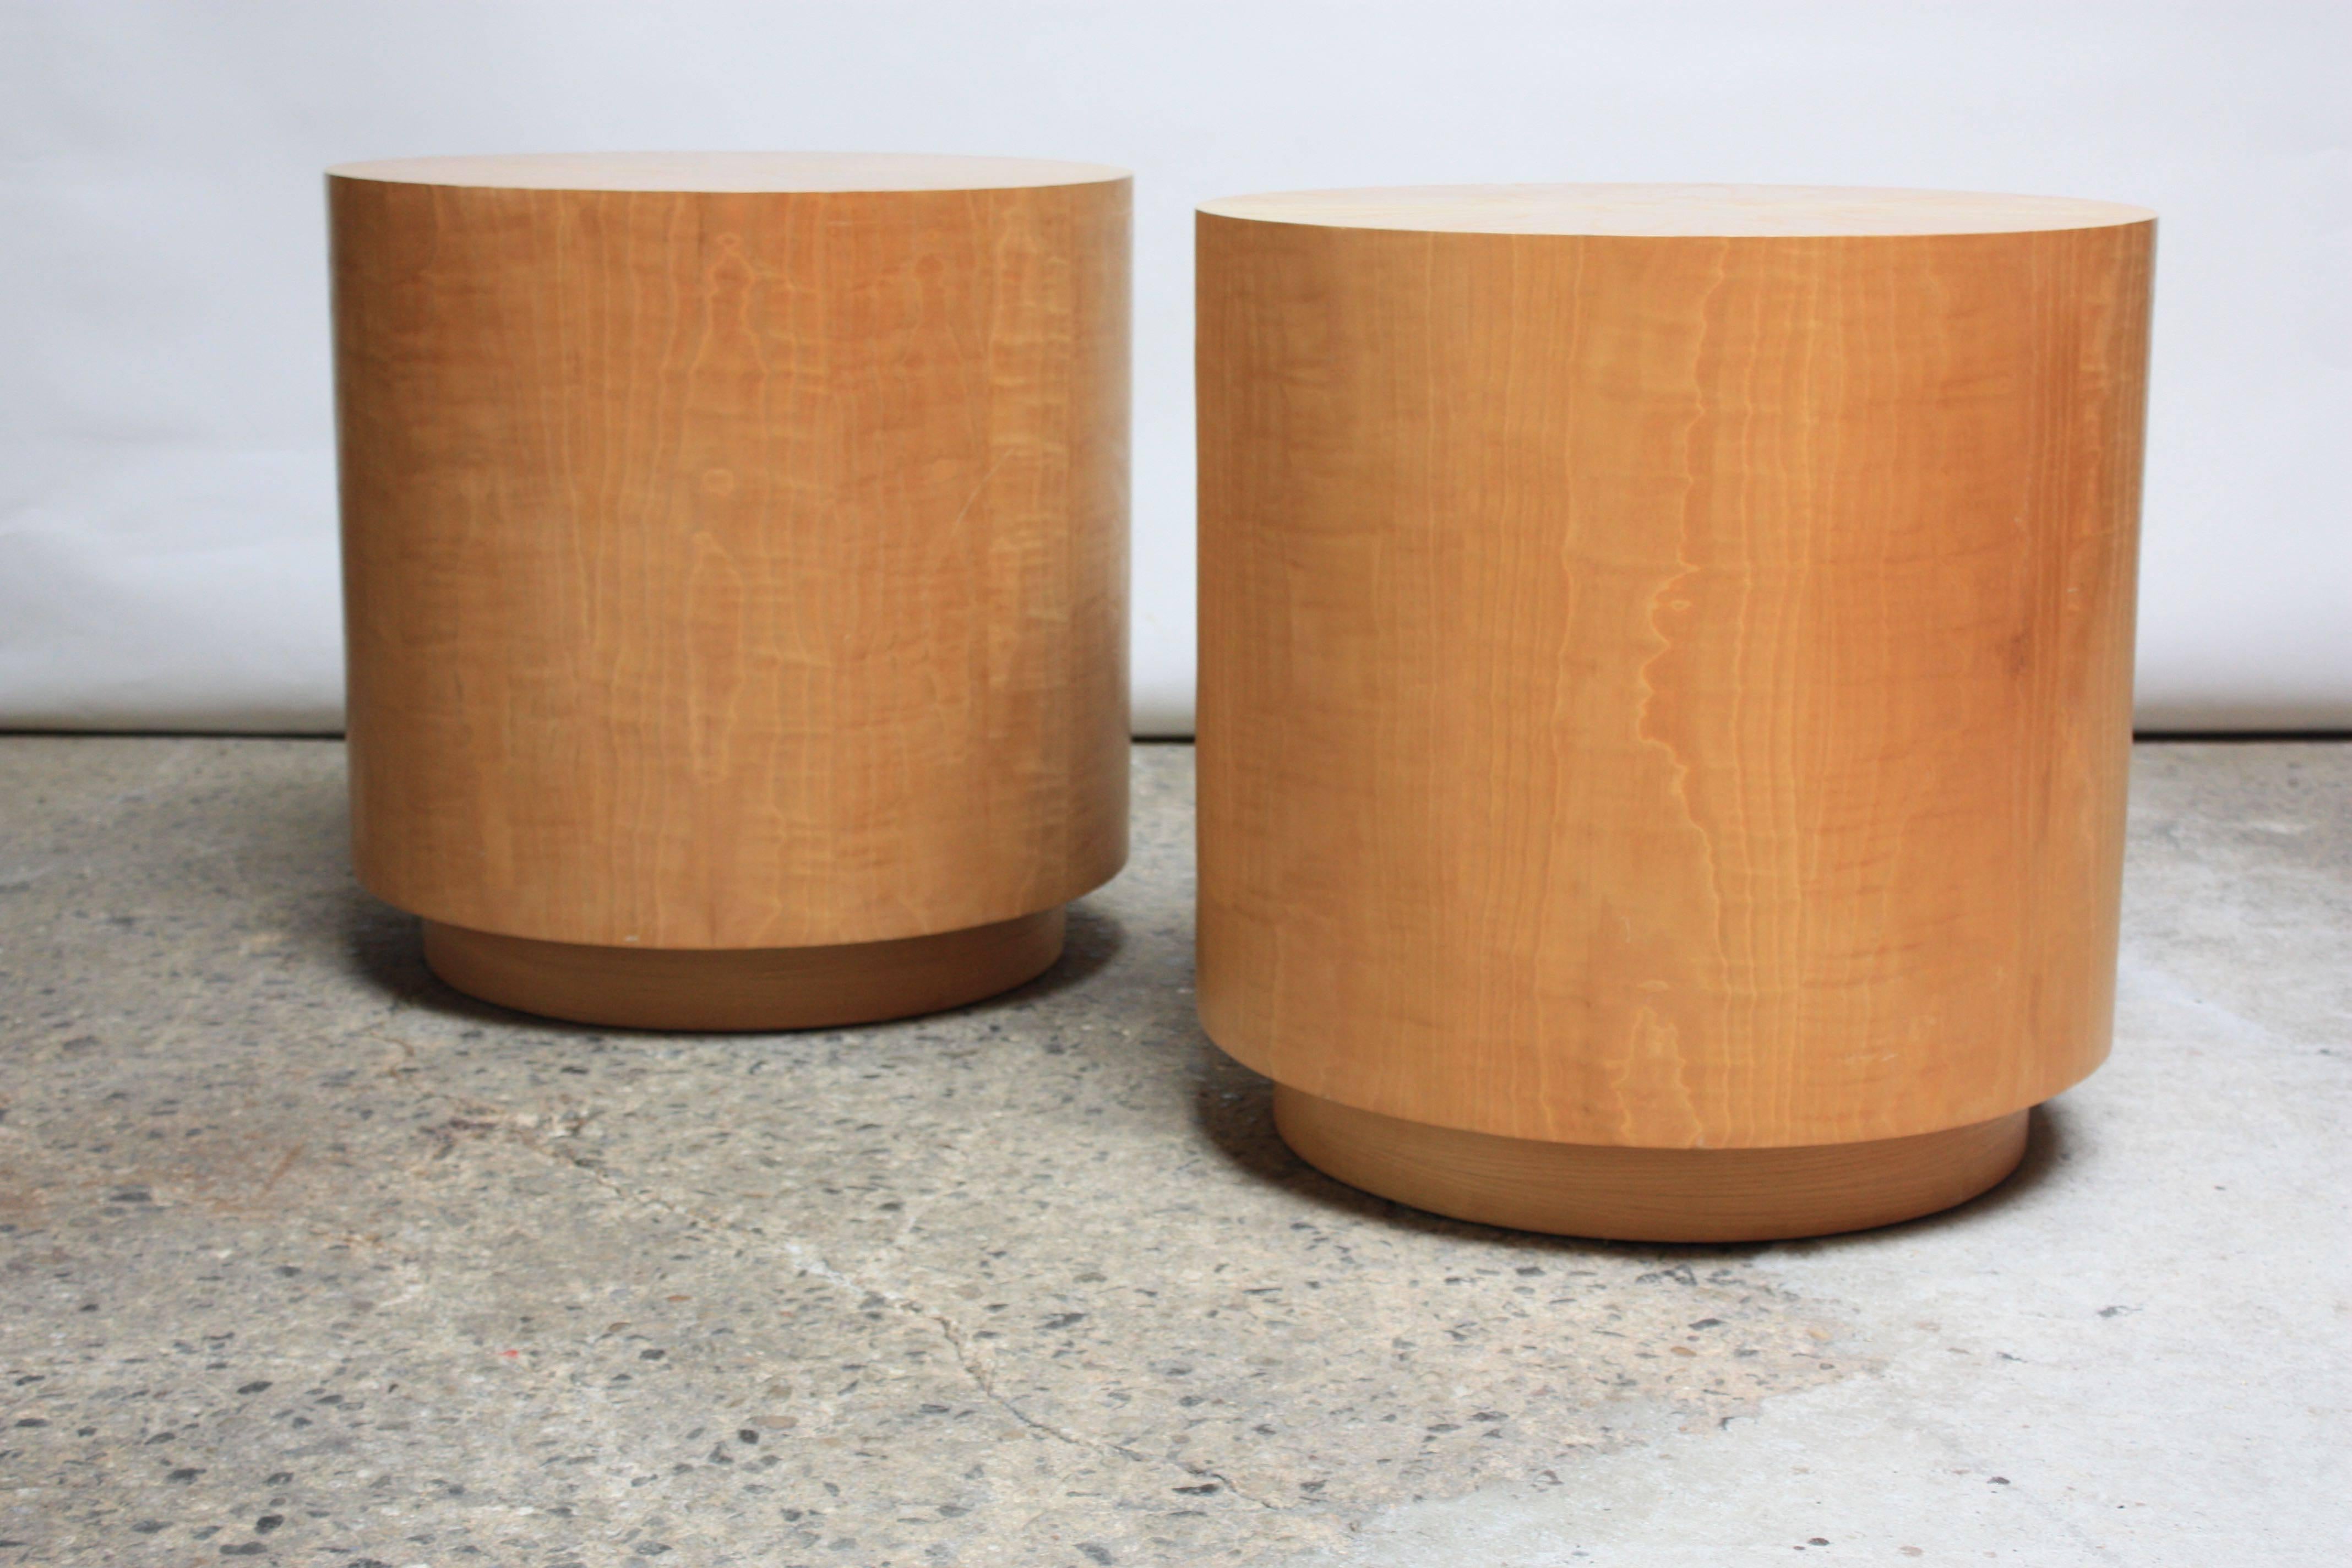 Mid-Century Modern drum pedestals / tables composed of exquisite bookmatched bird's-eye maple veneer. Tables boast beautiful grain, vivid pattern, and impressive size. Can be used as large side tables or display stands. Alternatively, glass tops /